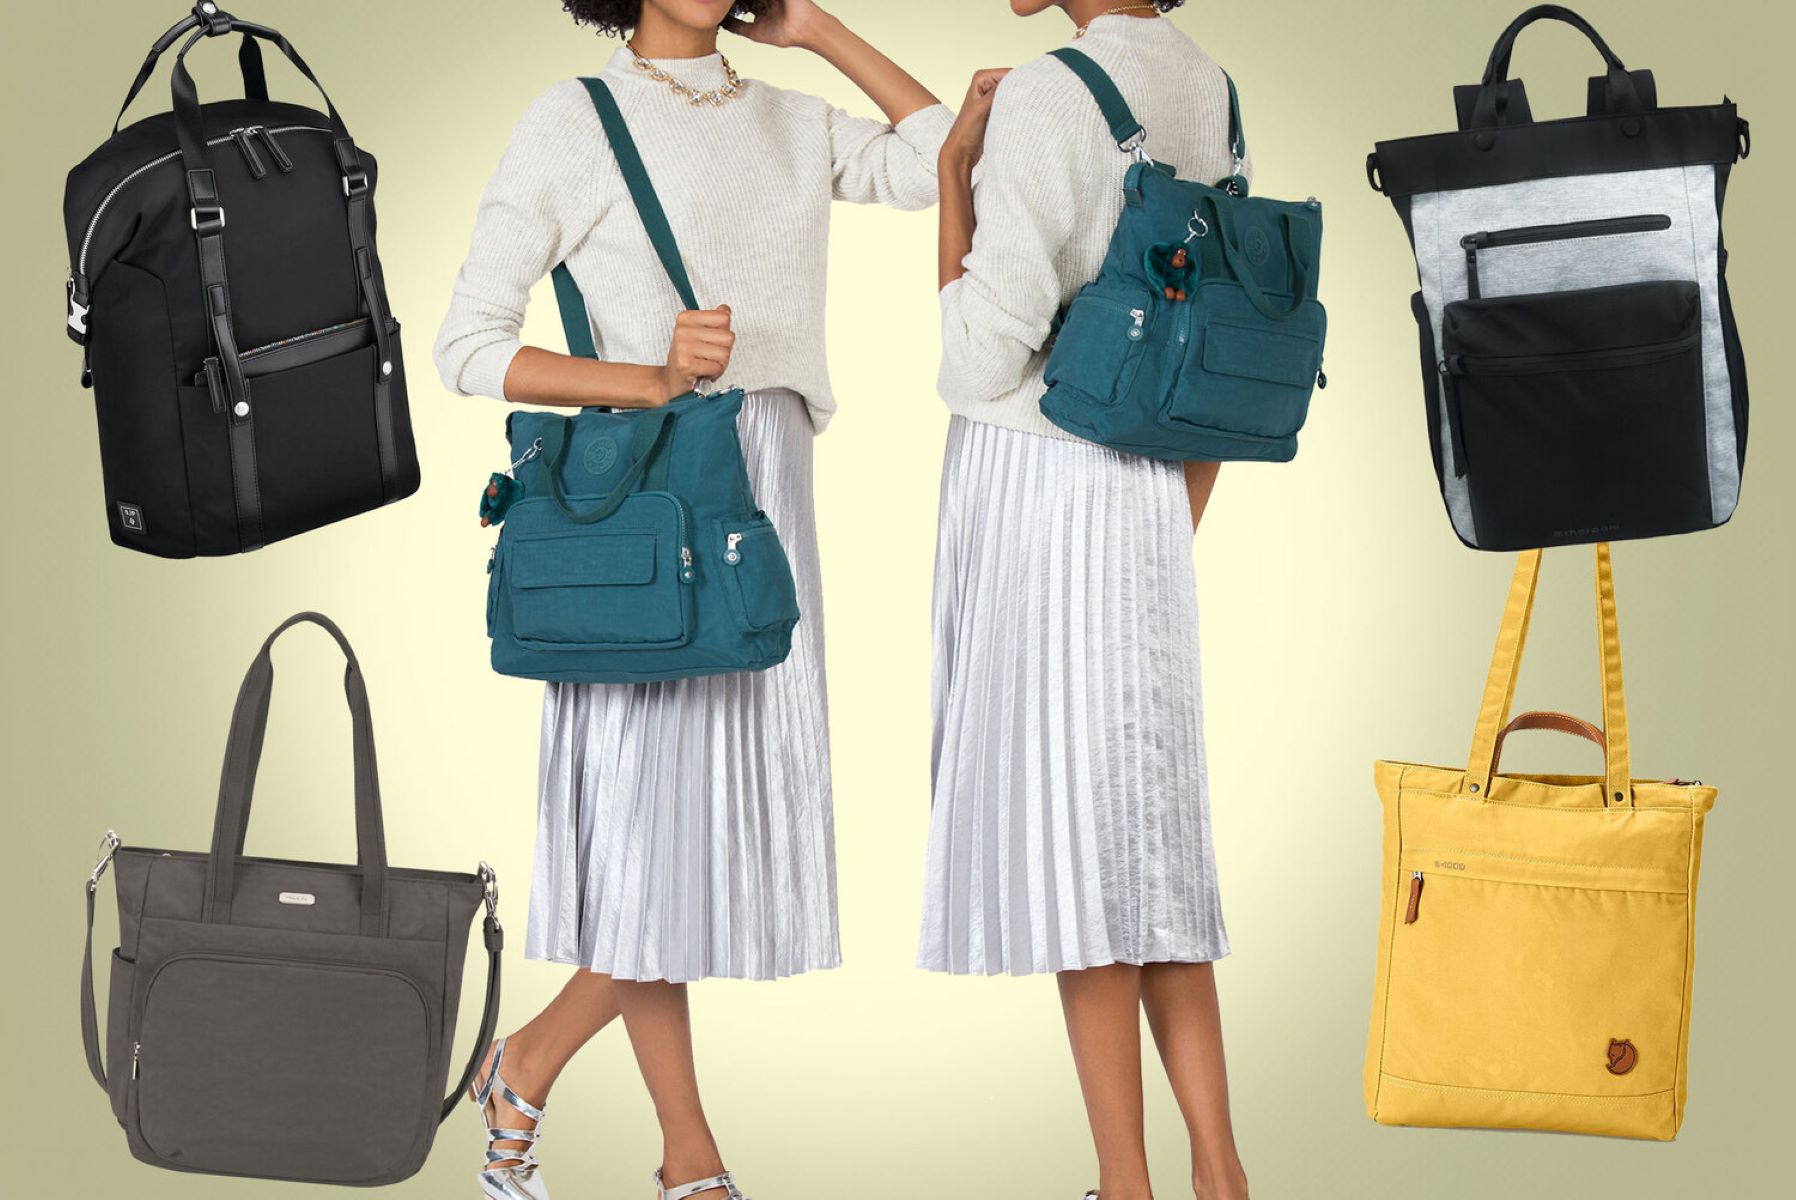 Backpack Vs. Tote Bag: The Ultimate Showdown For Carrying Essentials!